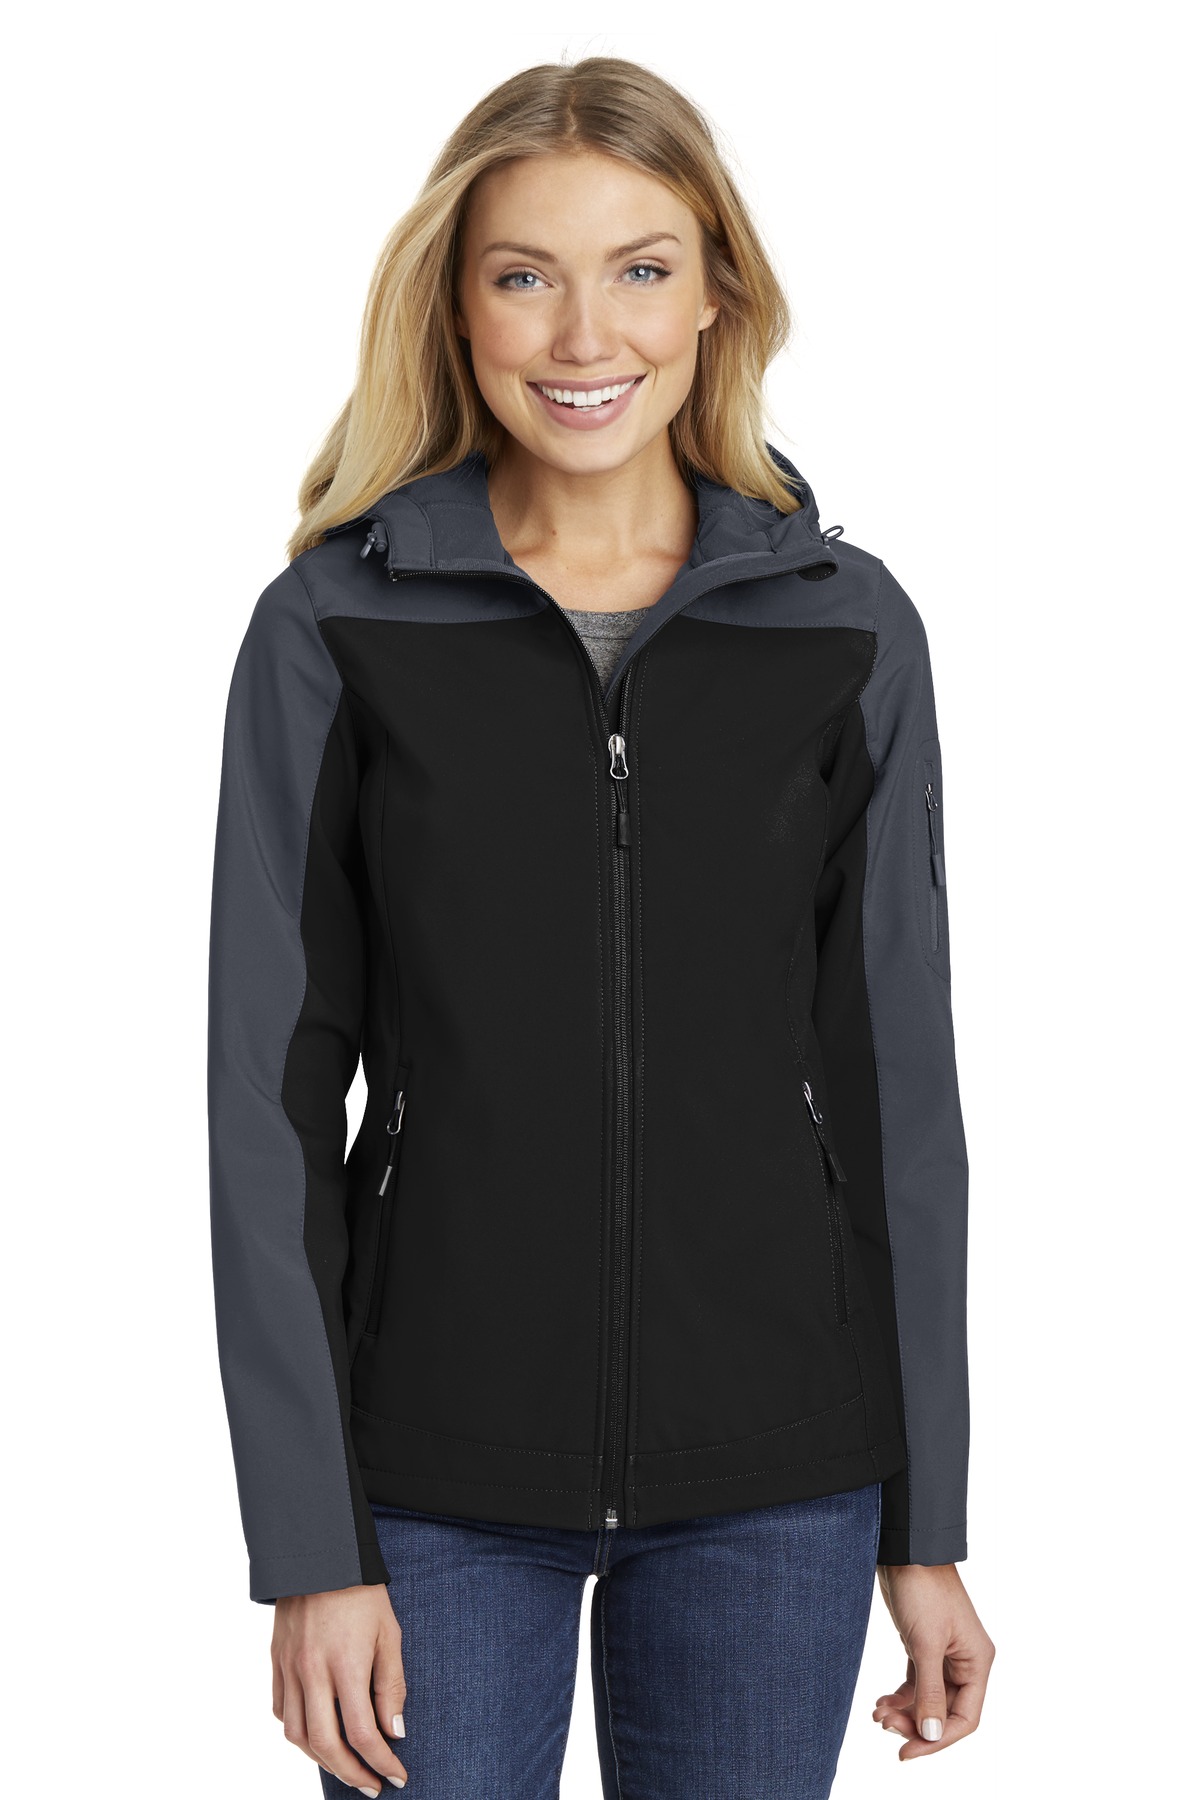 Port Authority Ladies Hooded Core Soft Shell Jacket....